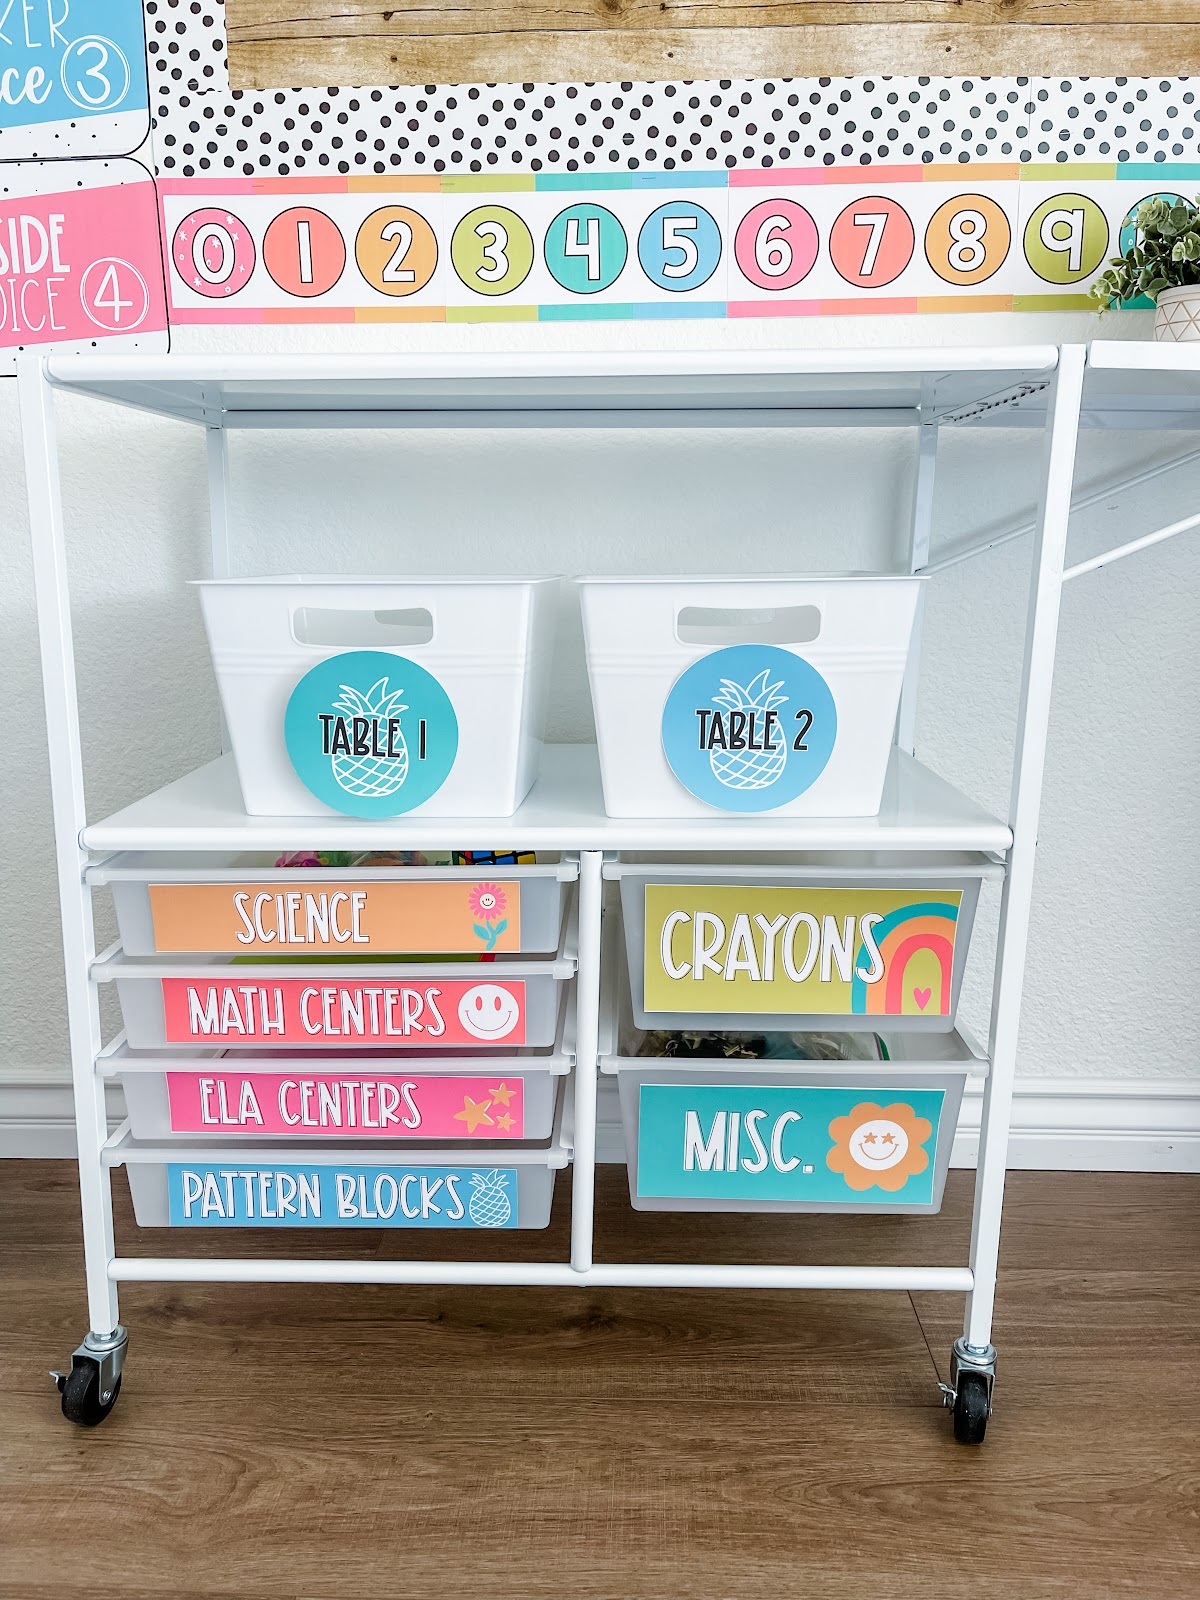 This image shows a rolling cart with tropical-themed labels. The labels include "Table 1", "science", "Math Centers", and "crayons". 